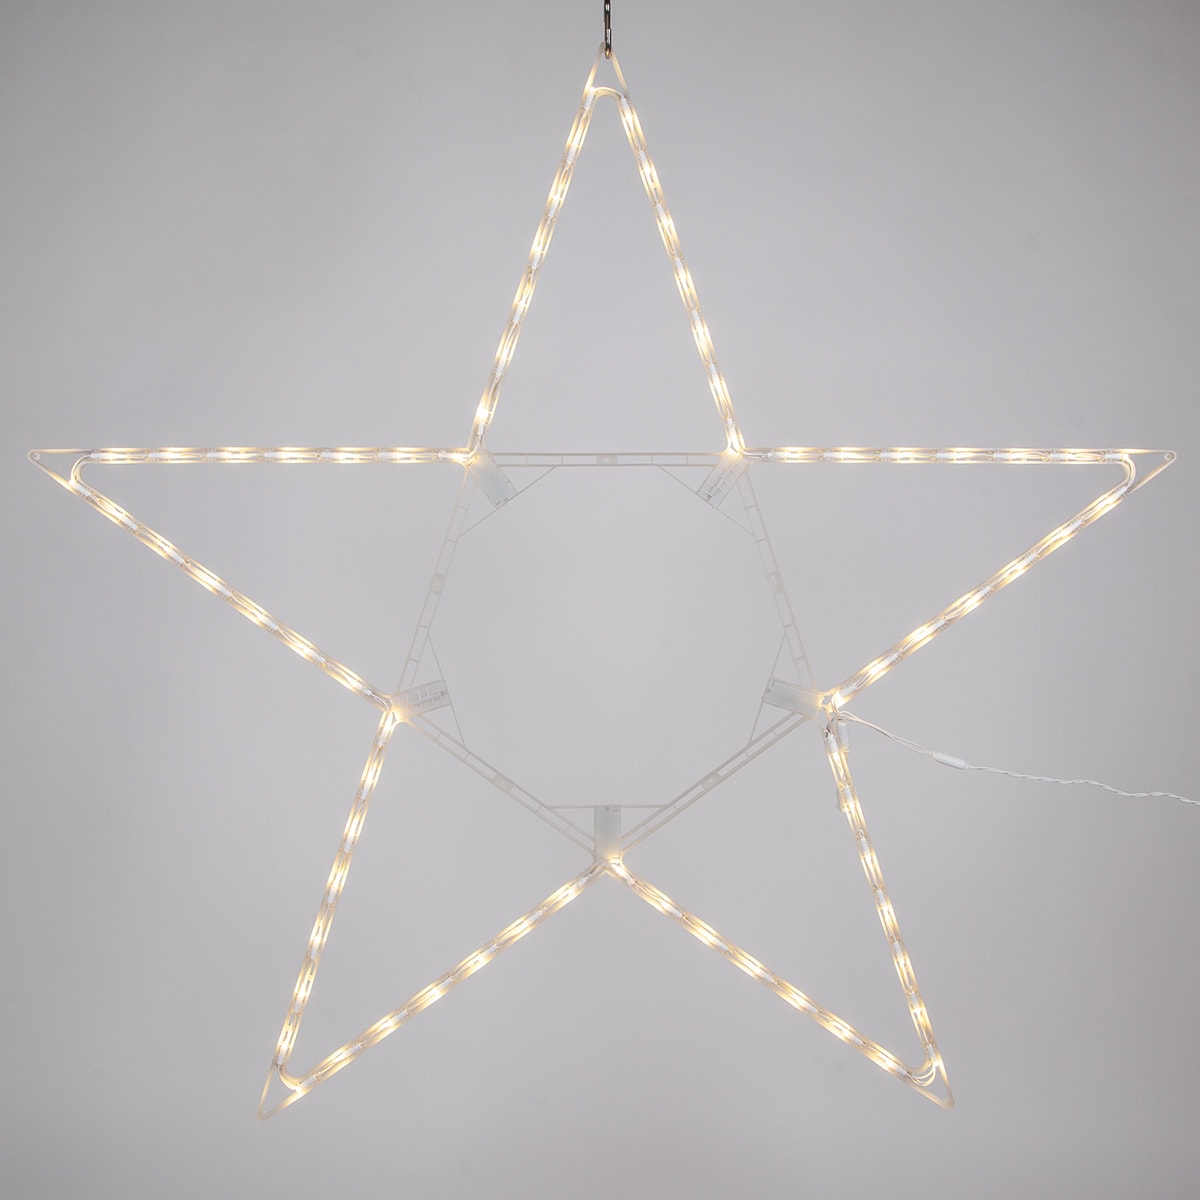 Kringle Traditions 14 Green LED Moravian Star